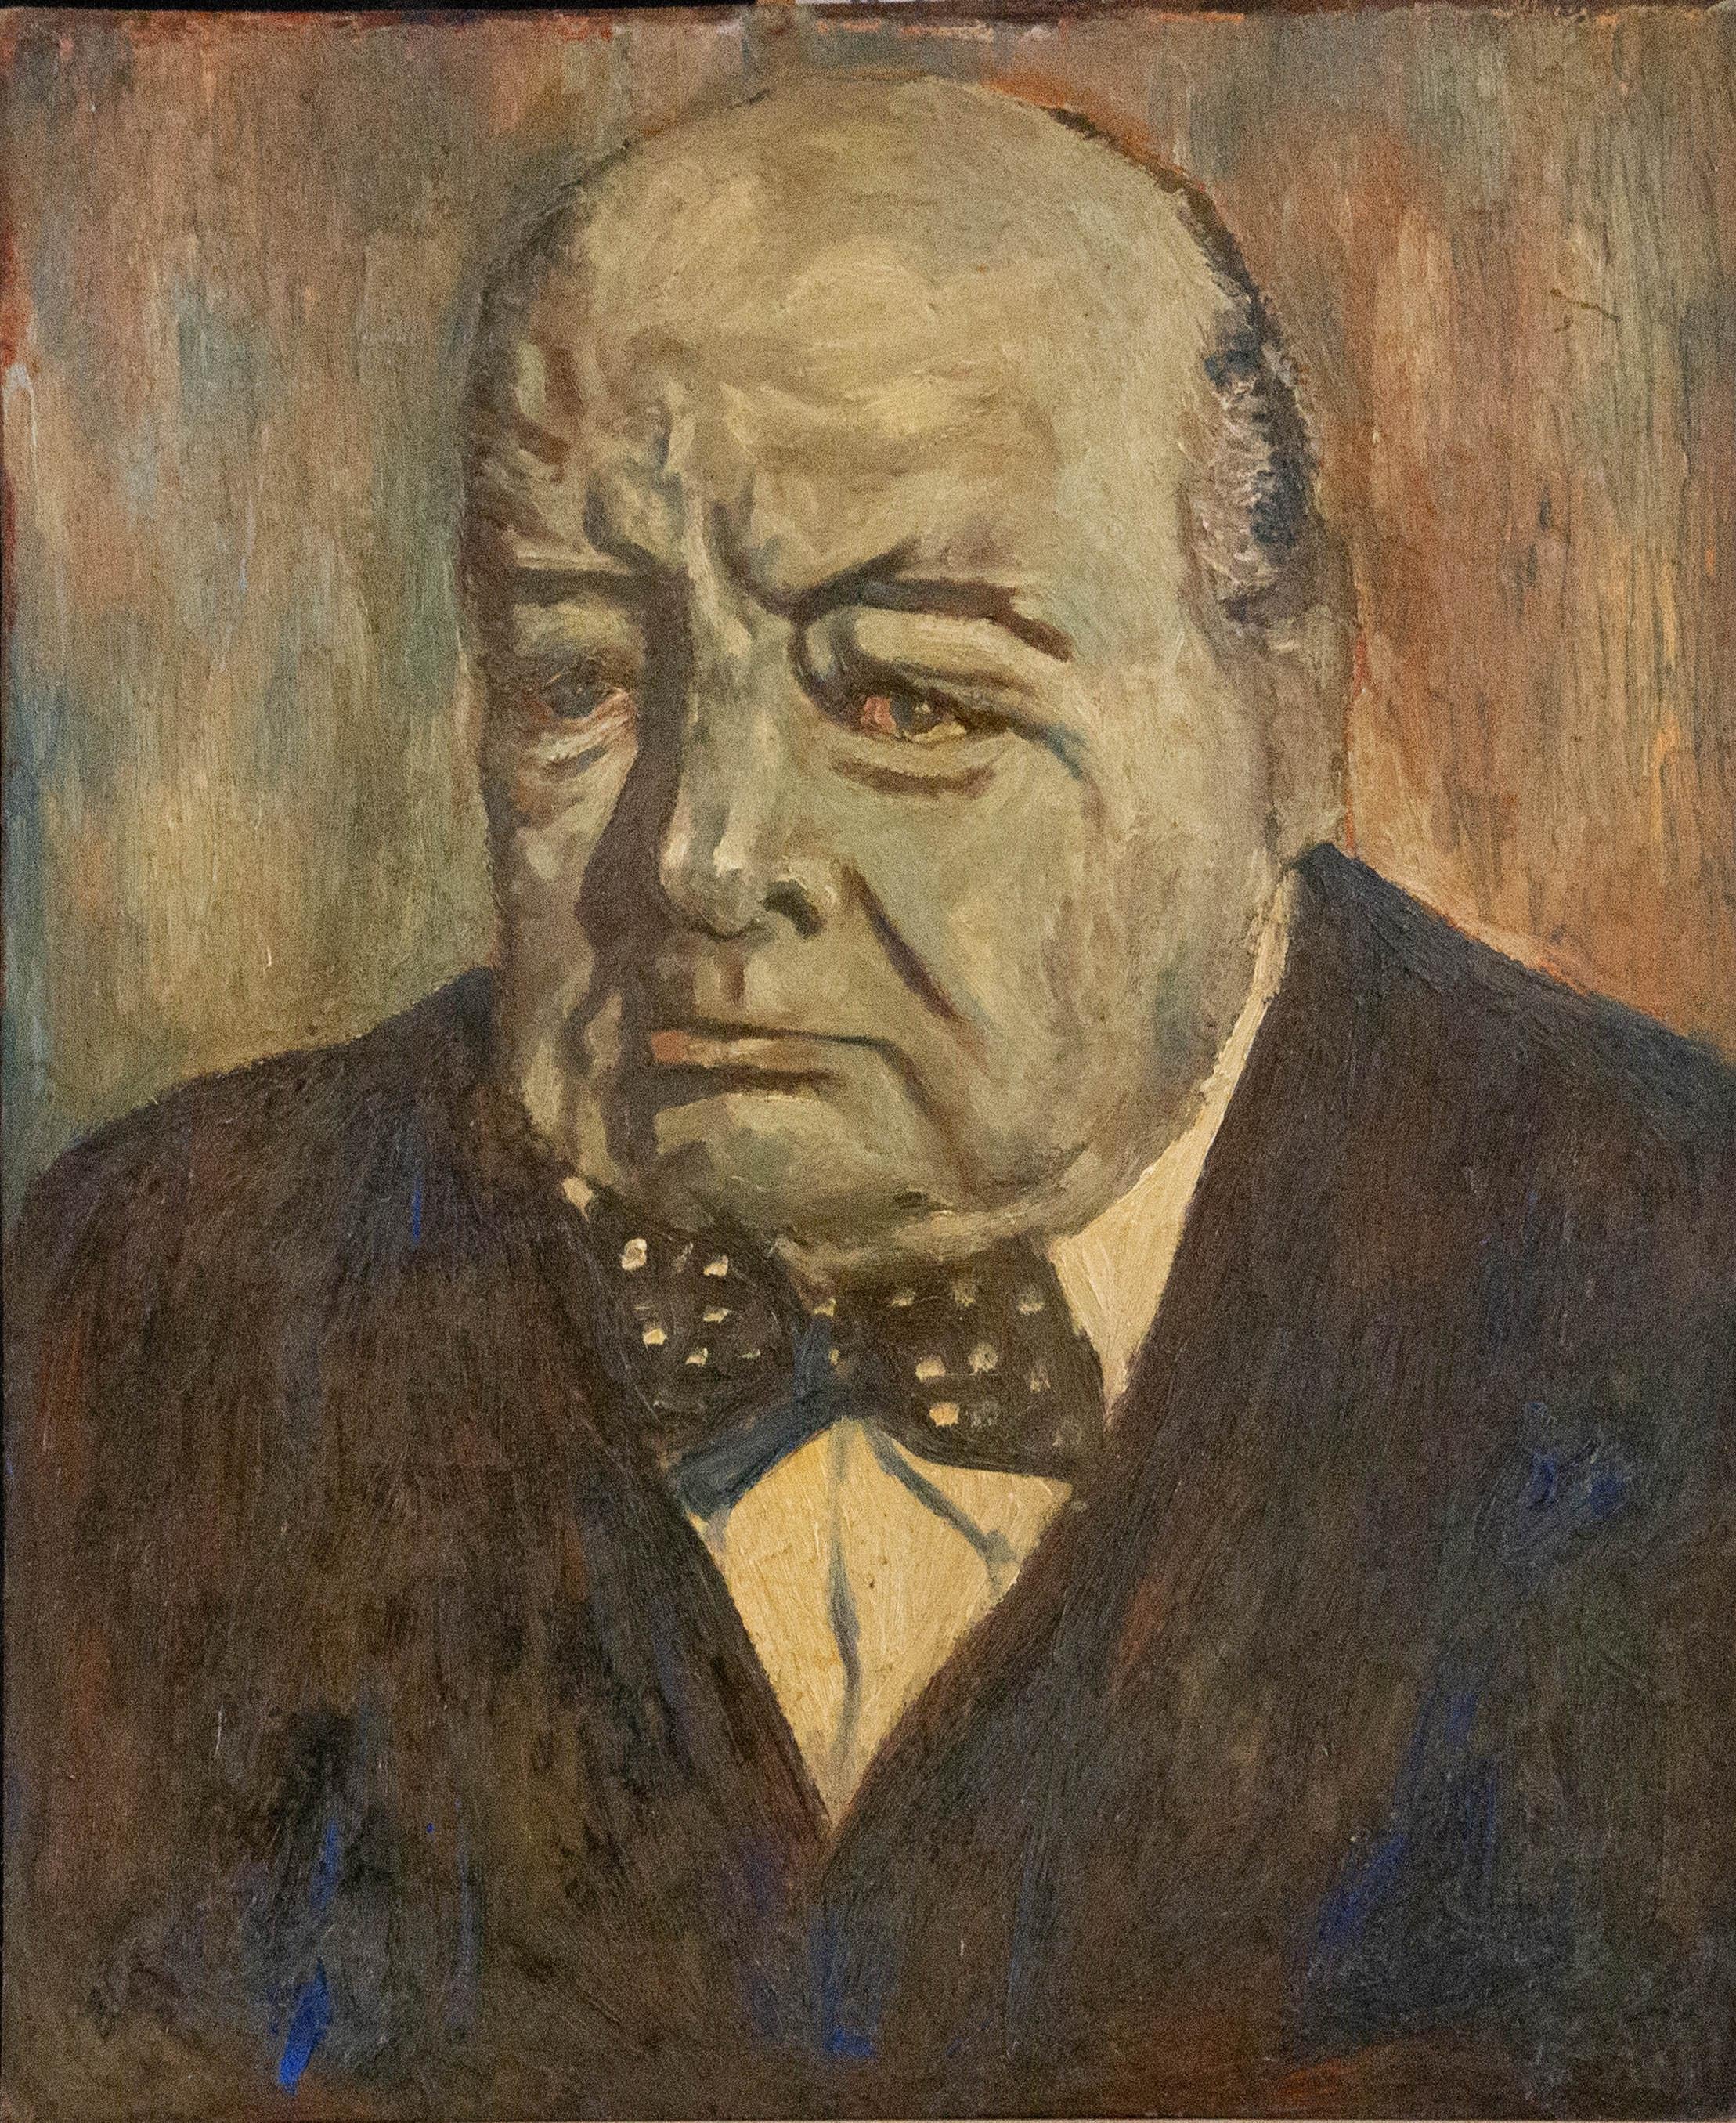 A striking and eye catching portrait of the celebrated English prime minister, Winston Churchill. The artist has used a textured and blocky technique to give great character to the already characterful face. The artist has scratched their initials